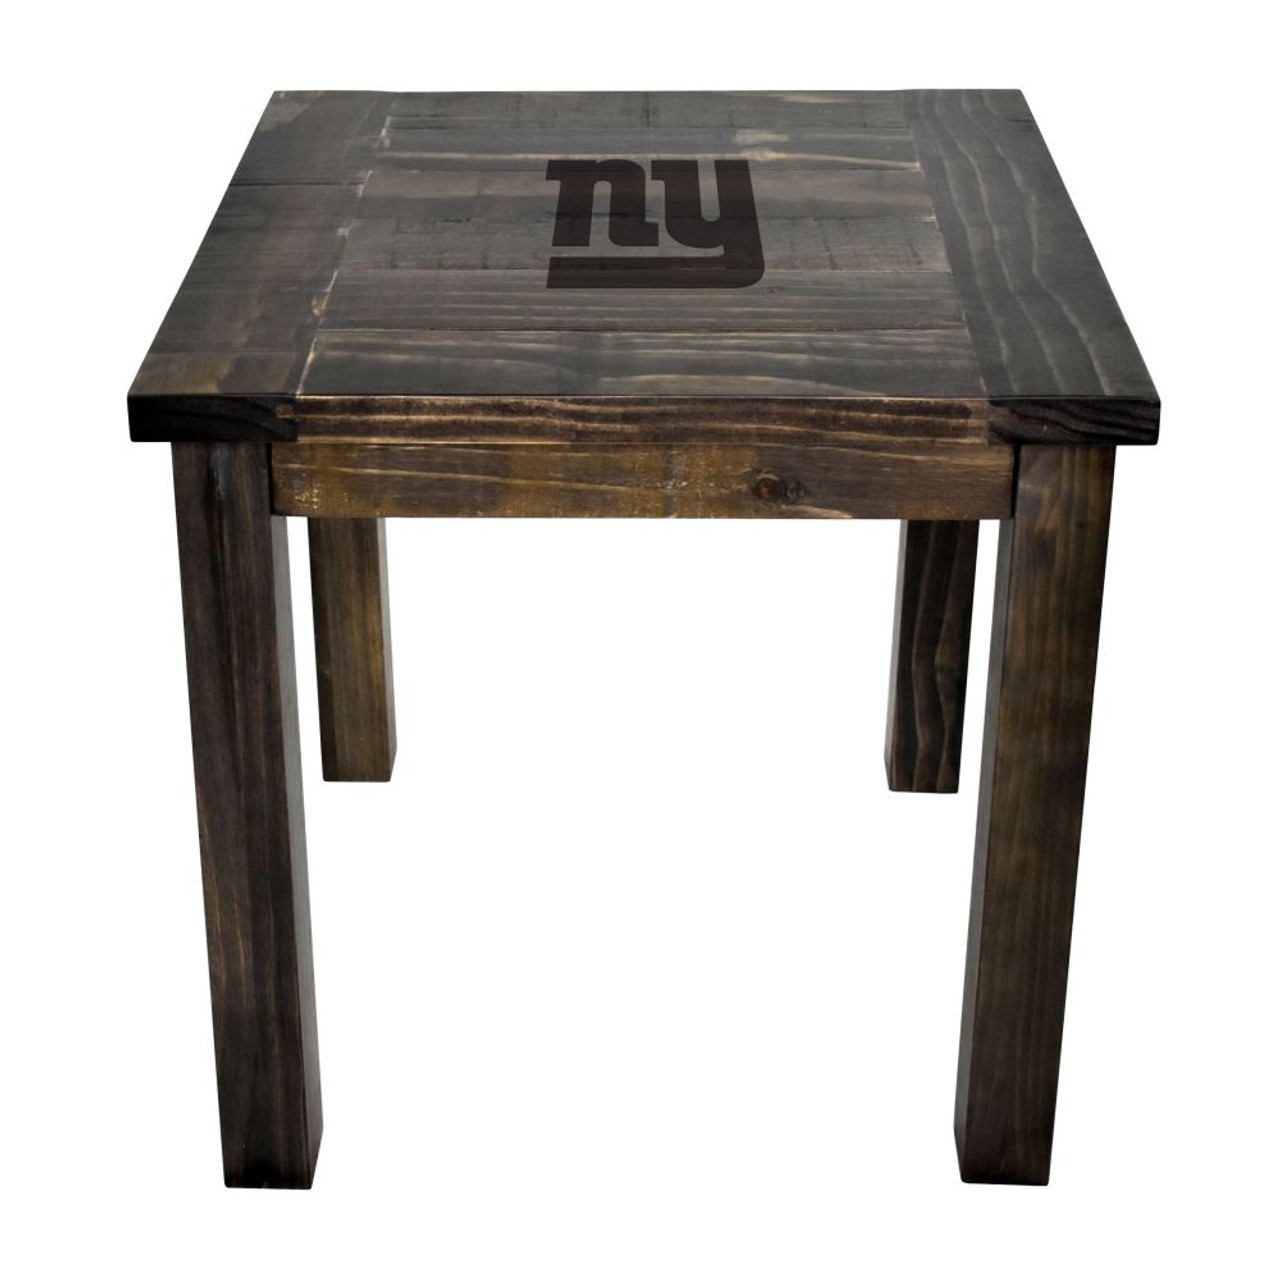 720801746692, New York, NY, NYG, Giants, Reclaimed, Side, Table, Imperial, NFL, 587-5013